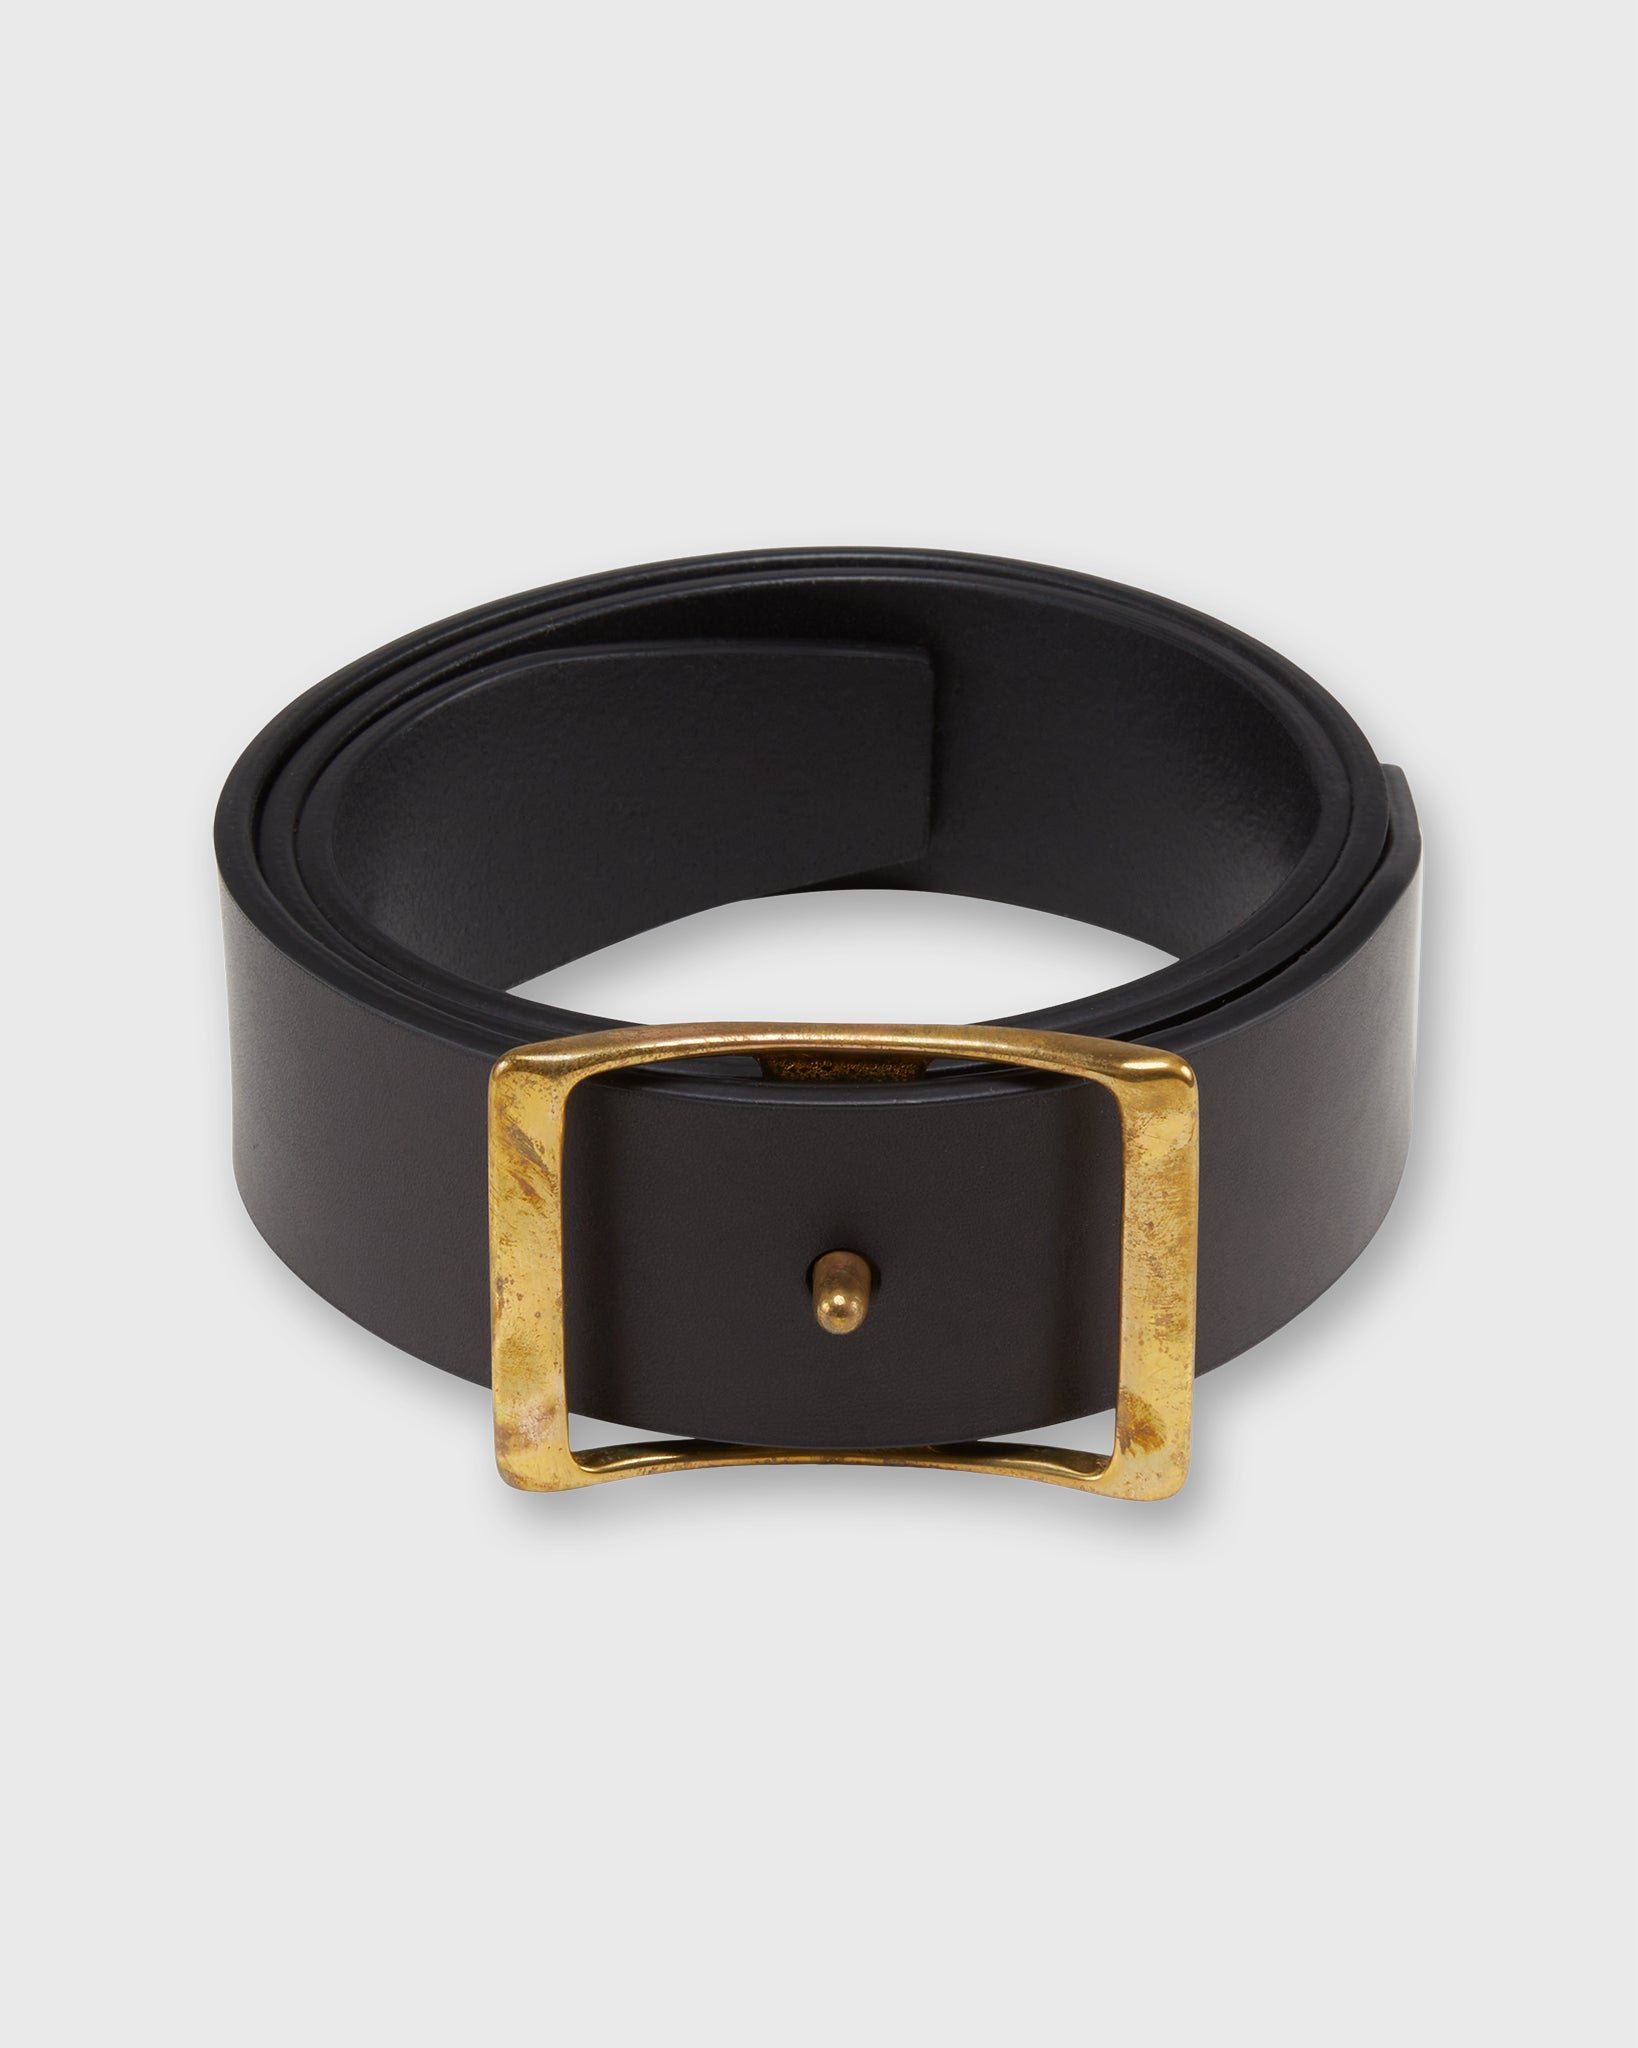 1.75" Conroy Belt in Black Leather